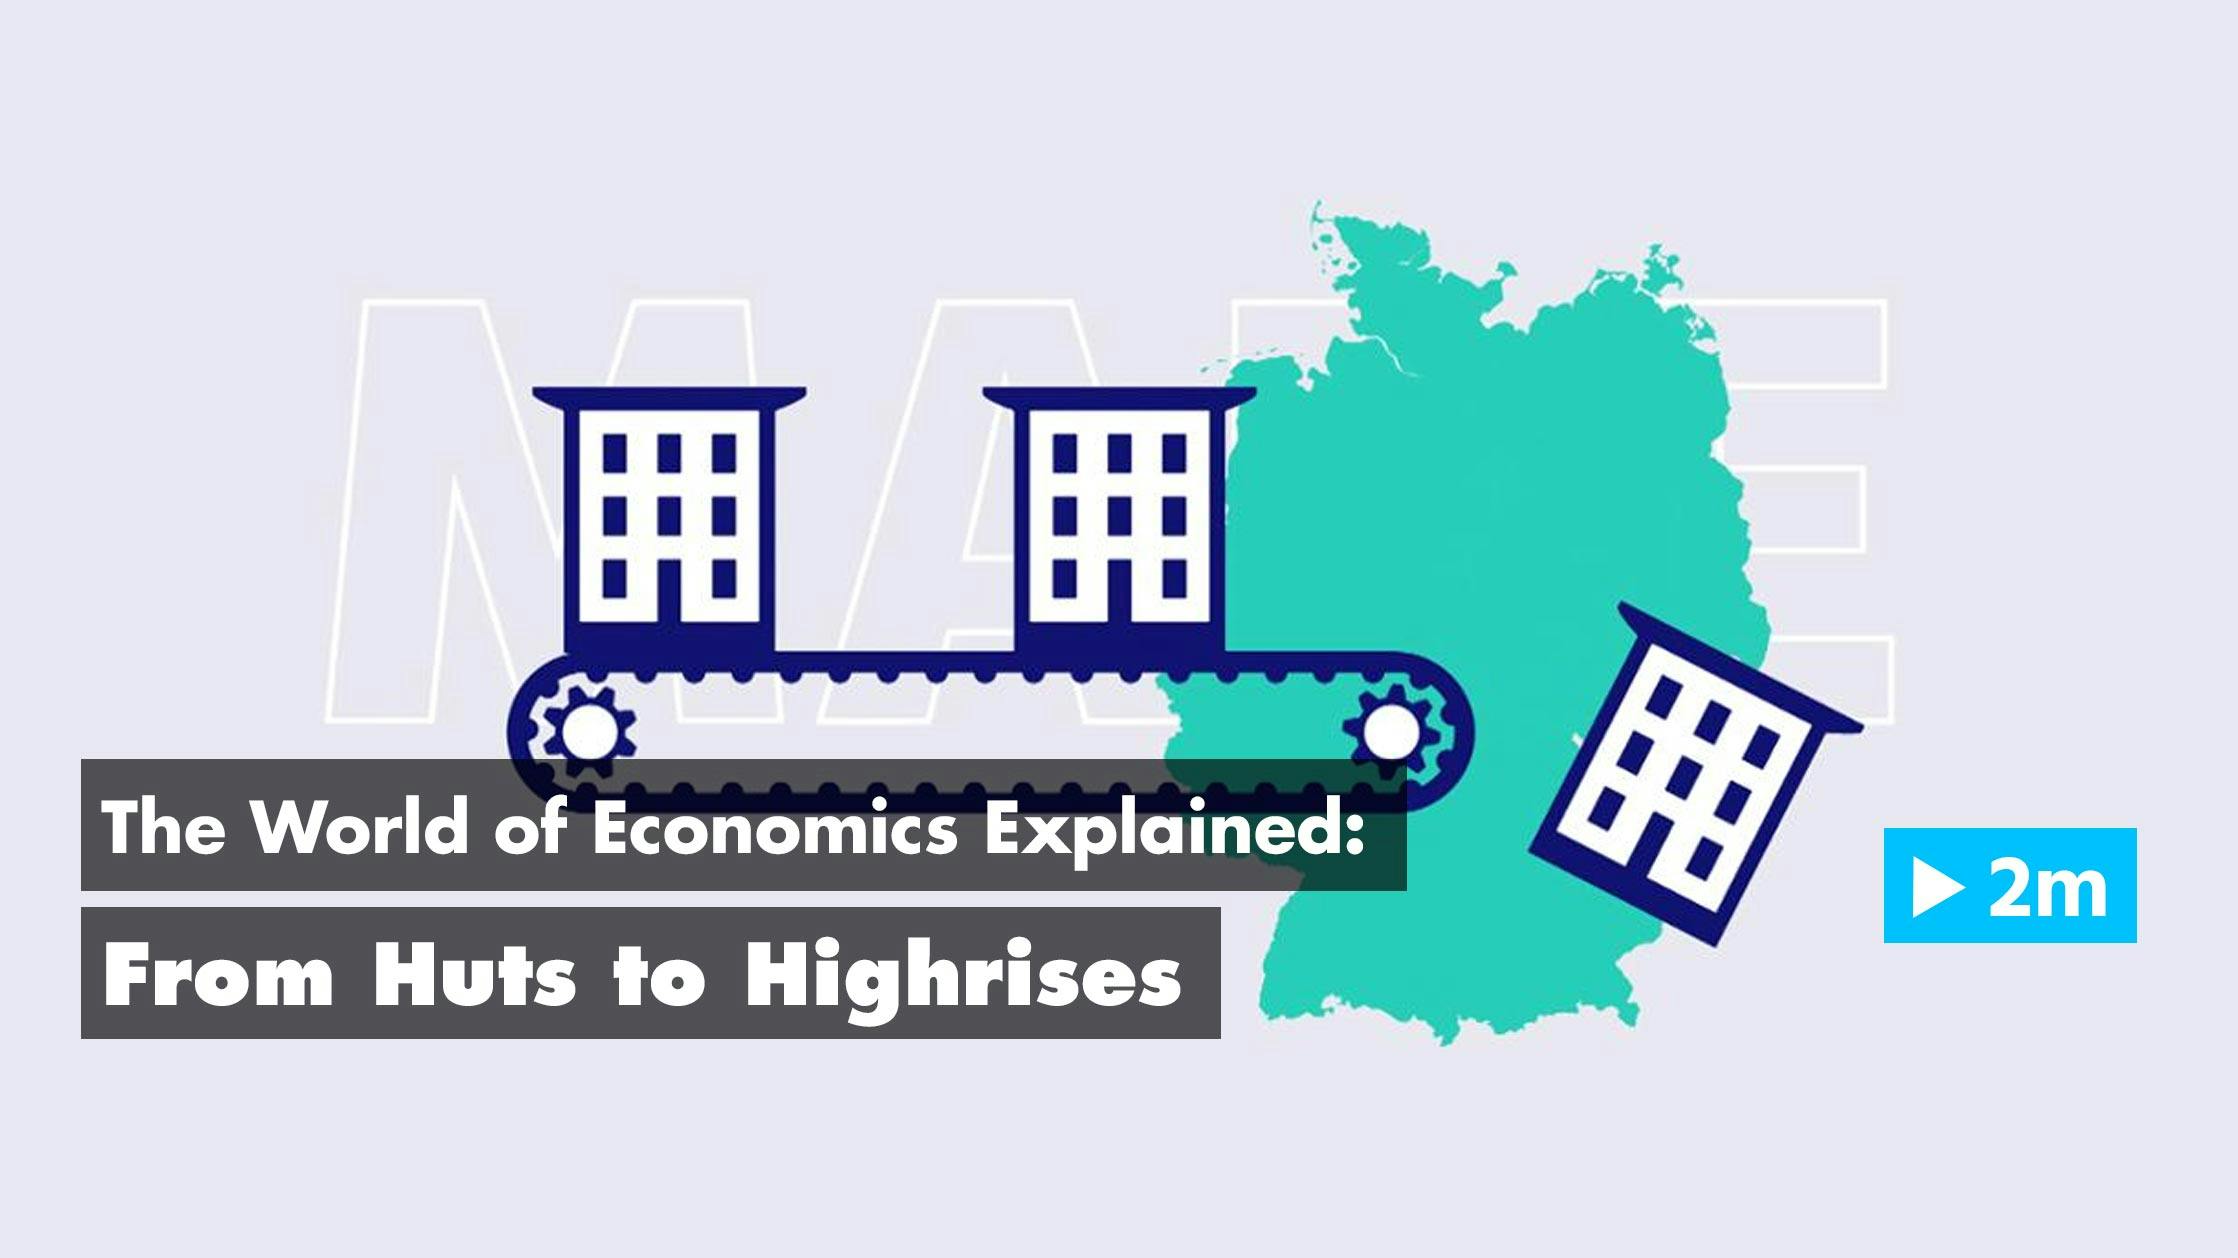 The World of Economics Explained: From Huts to Highrises